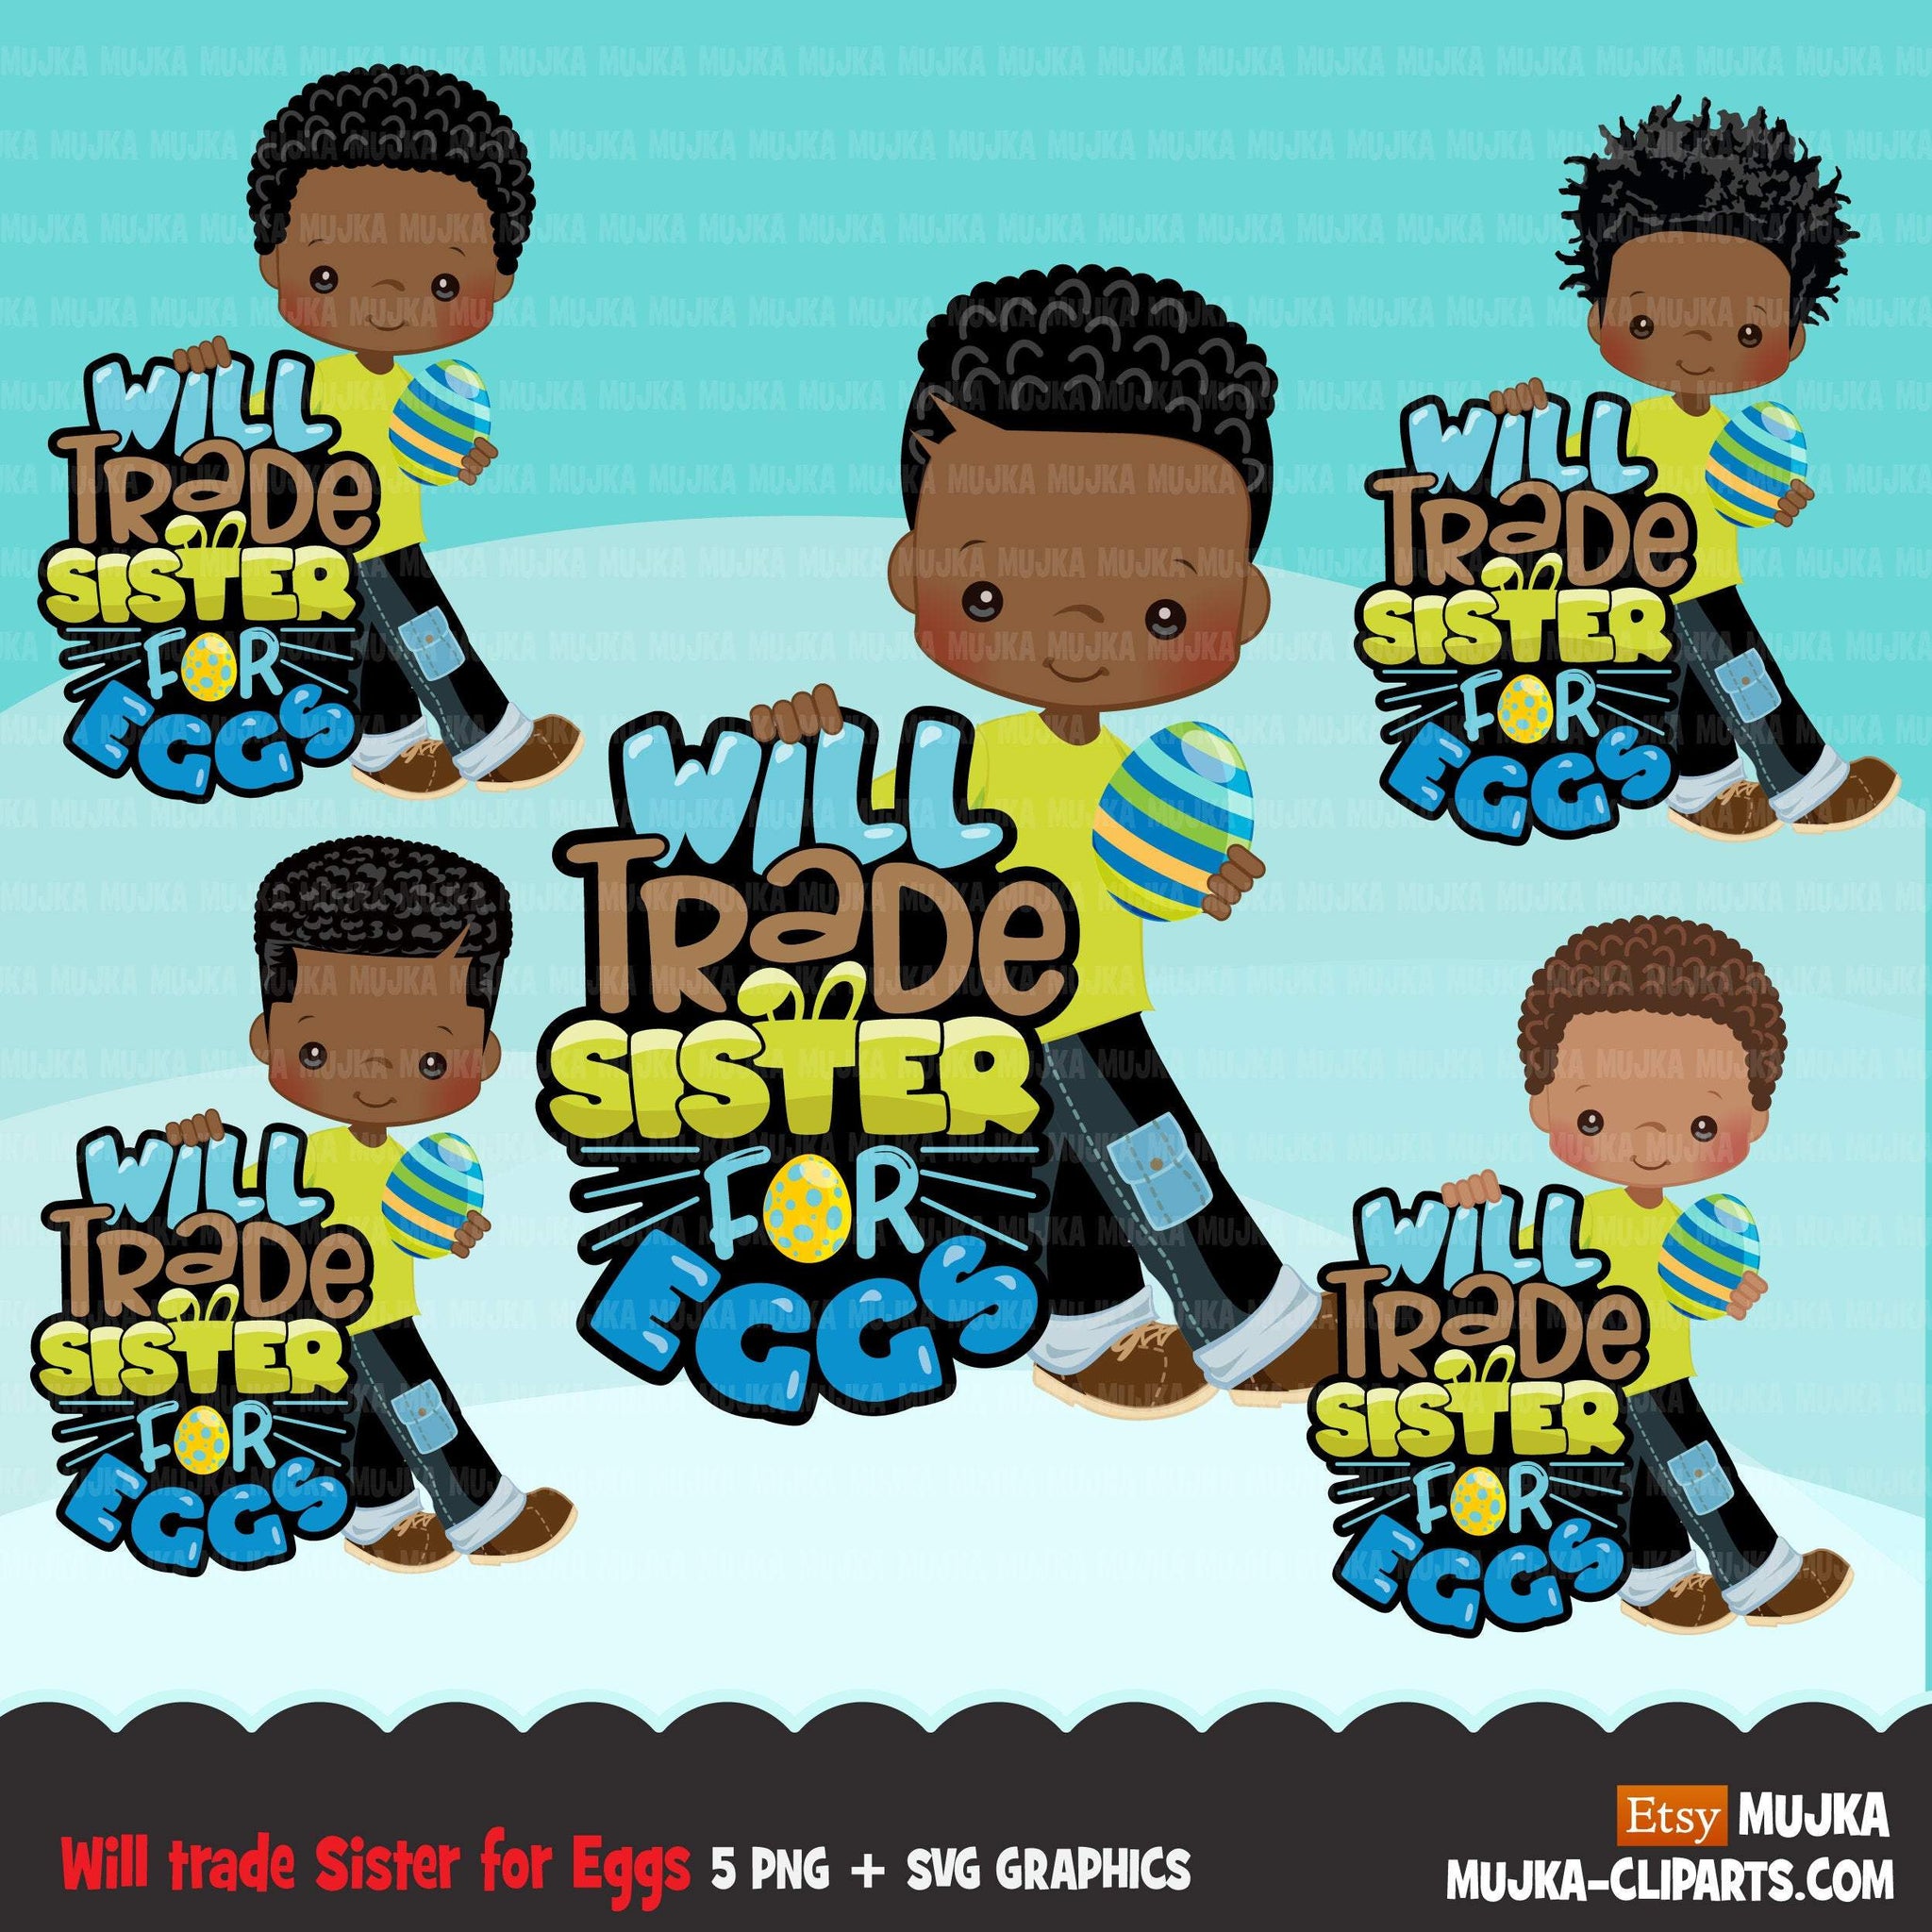 Easter PNG digital, Will trade sister for eggs Printable HTV sublimation image transfer clipart, t-shirt Afro black boy graphics